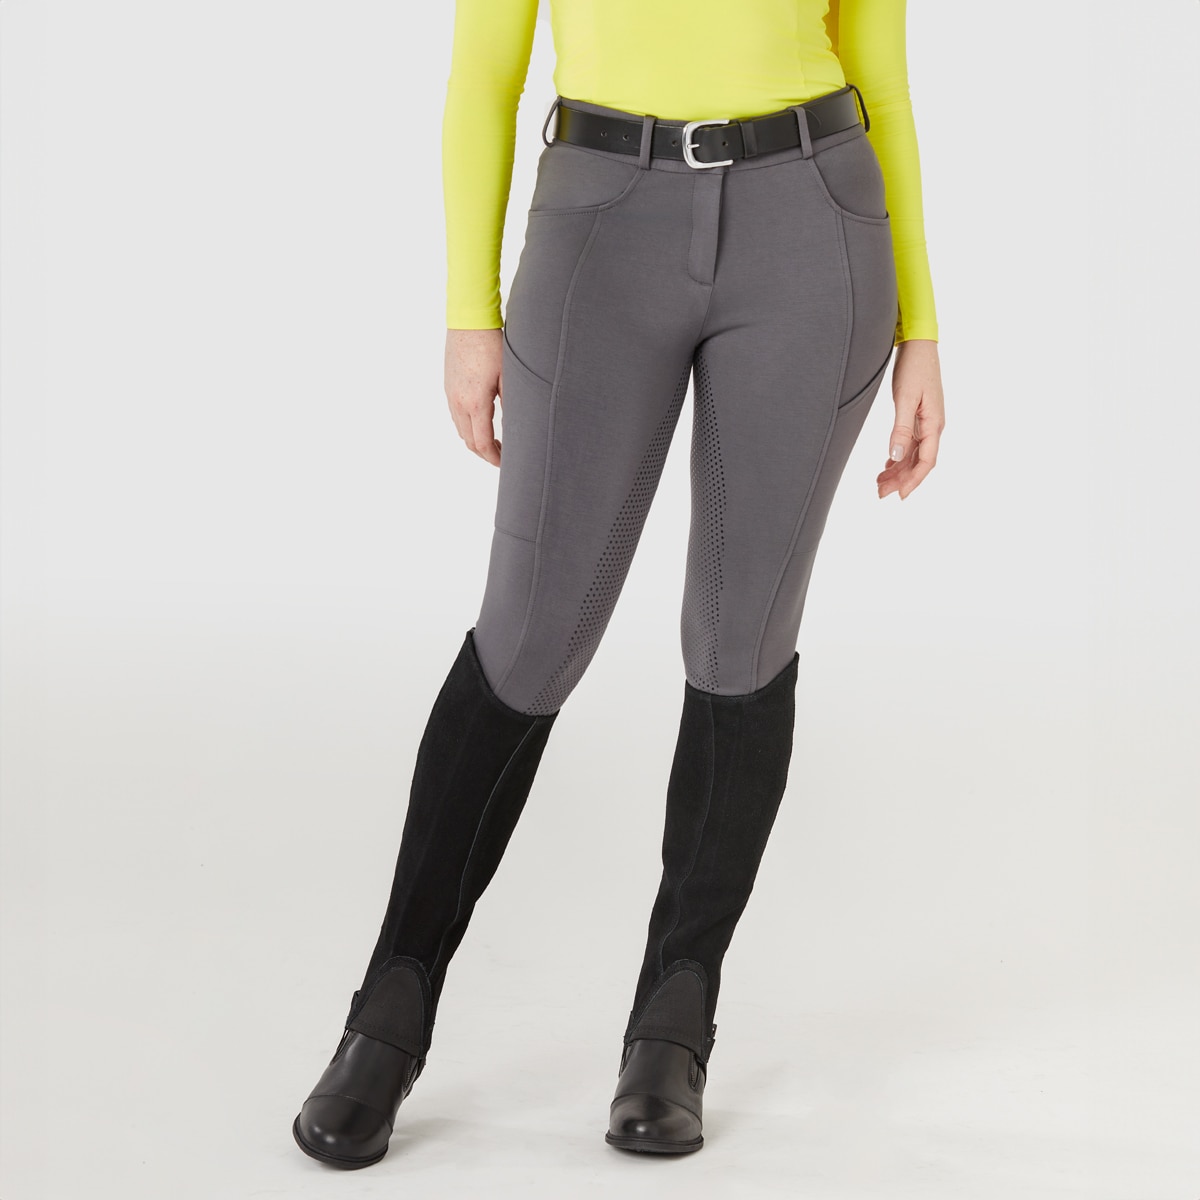 Piper Knit Everyday Mid-Rise Breeches by SmartPak - Full Seat